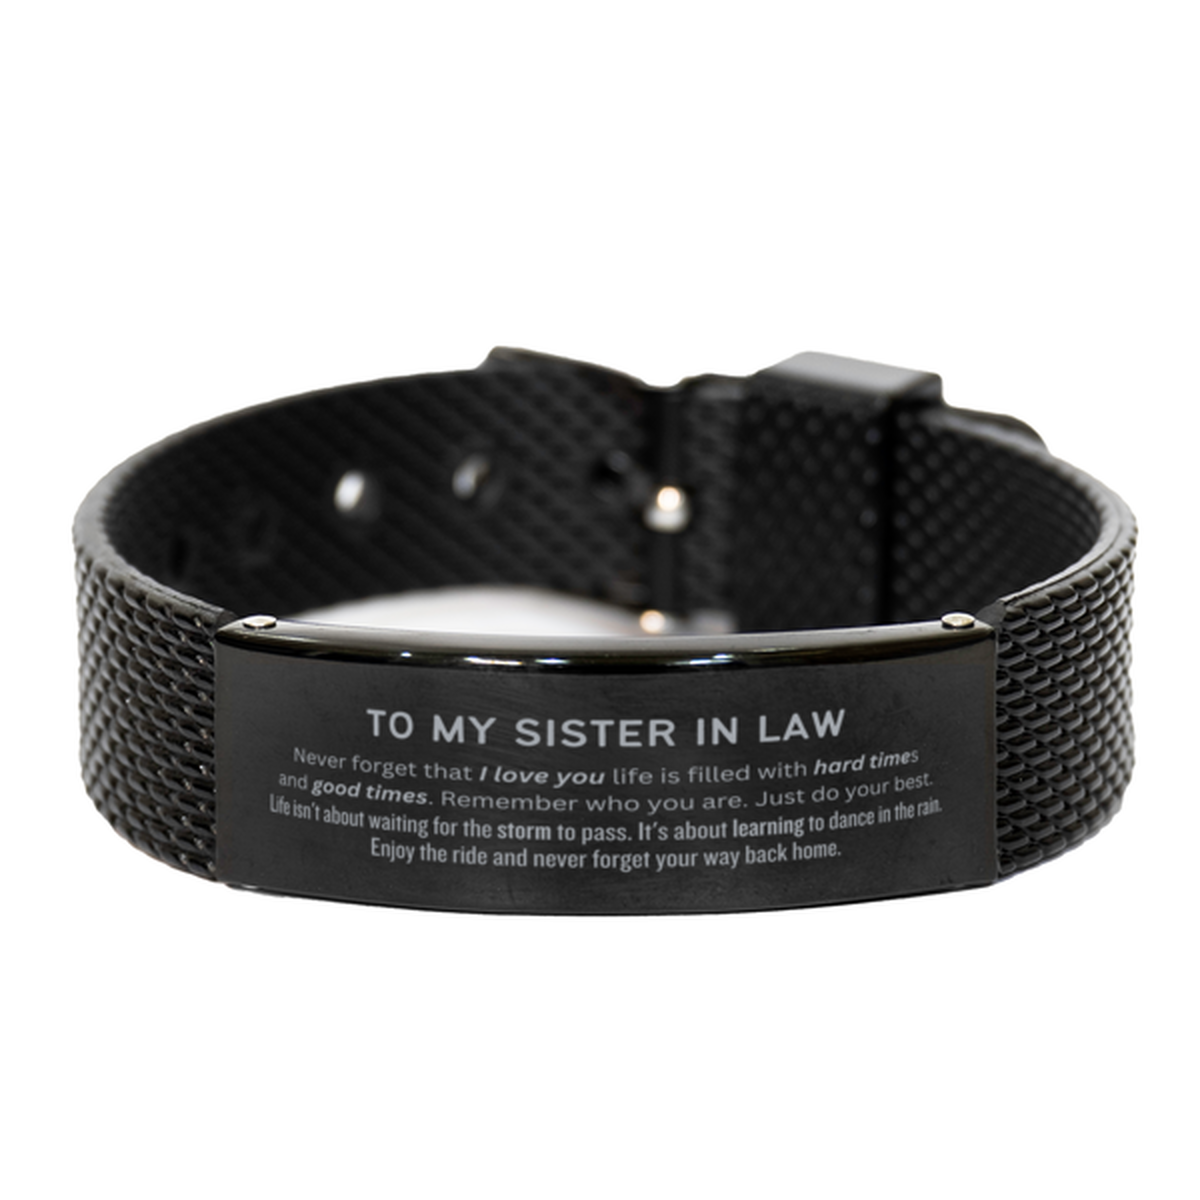 Christmas Sister In Law Black Shark Mesh Bracelet Gifts, To My Sister In Law Birthday Thank You Gifts For Sister In Law, Graduation Unique Gifts For Sister In Law To My Sister In Law Never forget that I love you life is filled with hard times and good tim